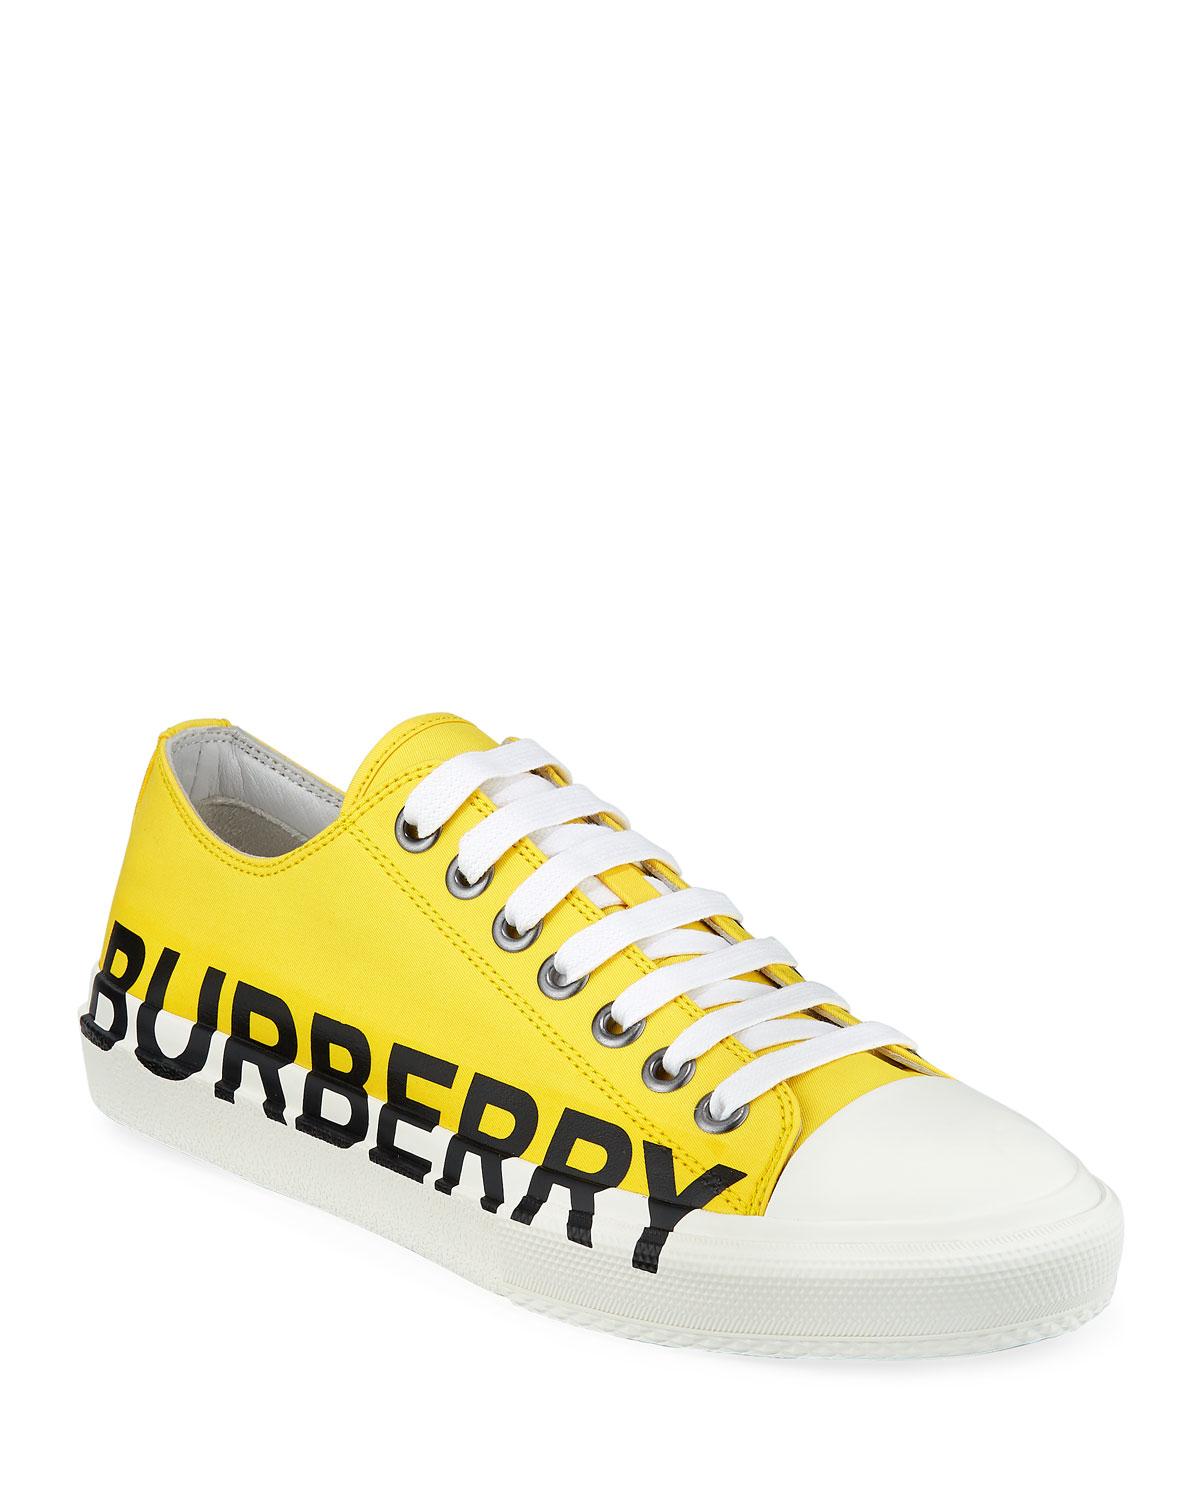 burberry shoes yellow